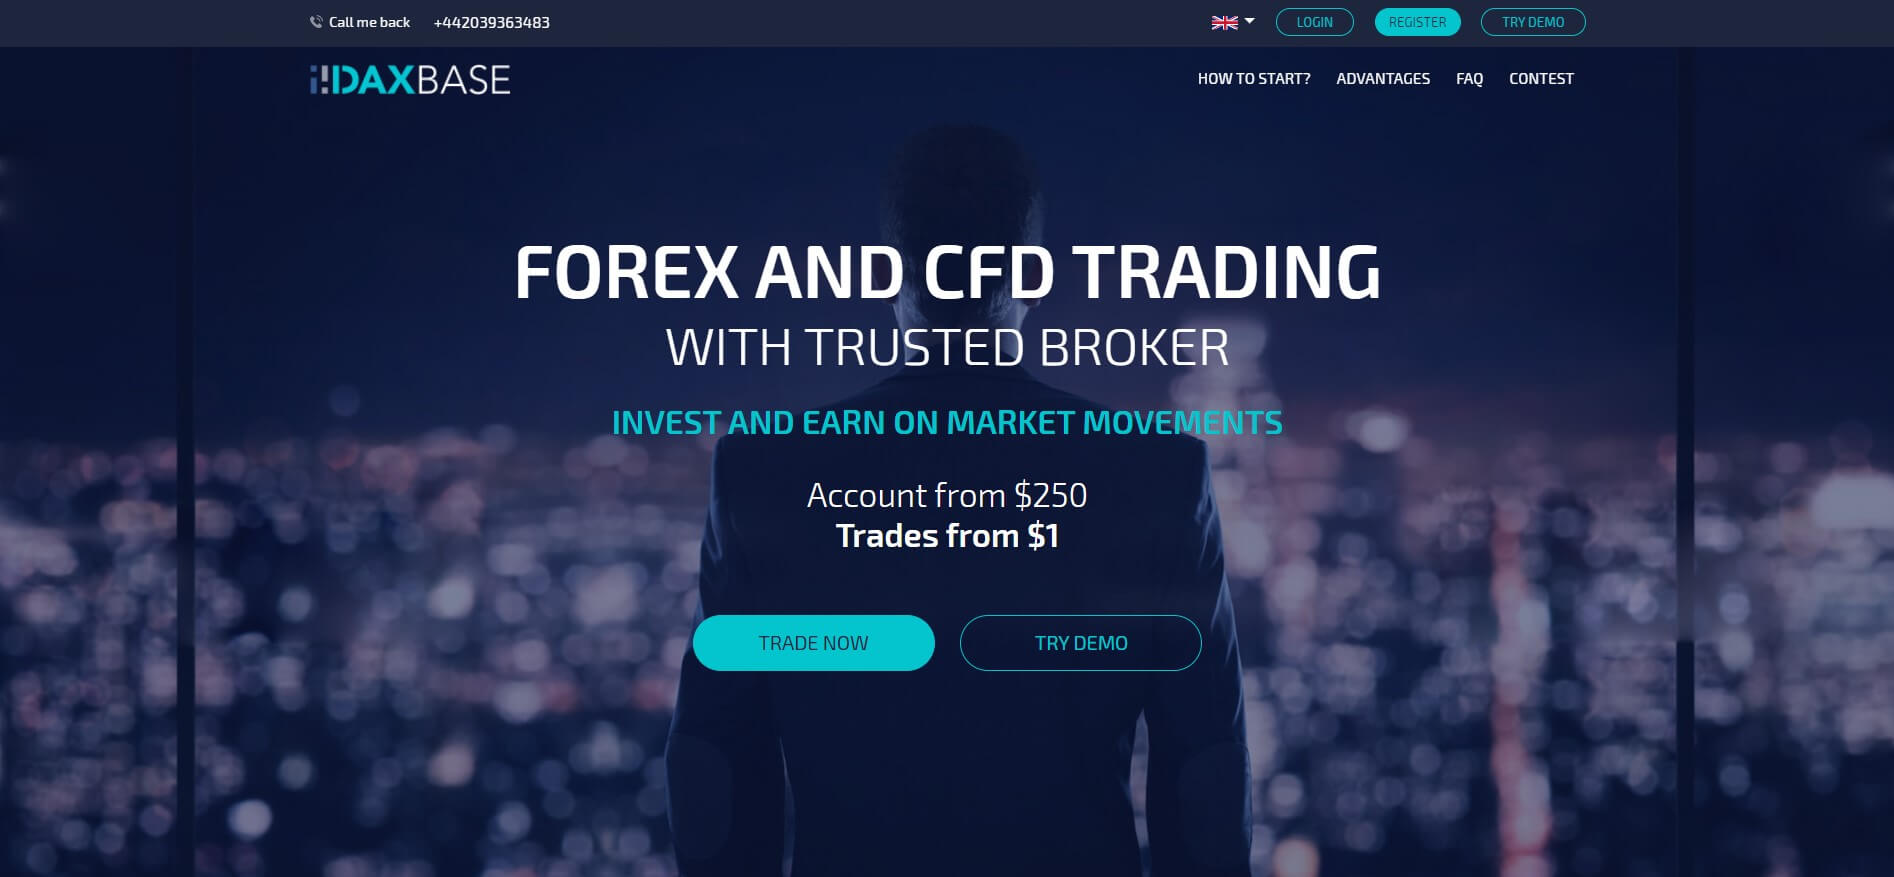 DAXBase - Forex and CFDs Trading Platform | USA Customers ...